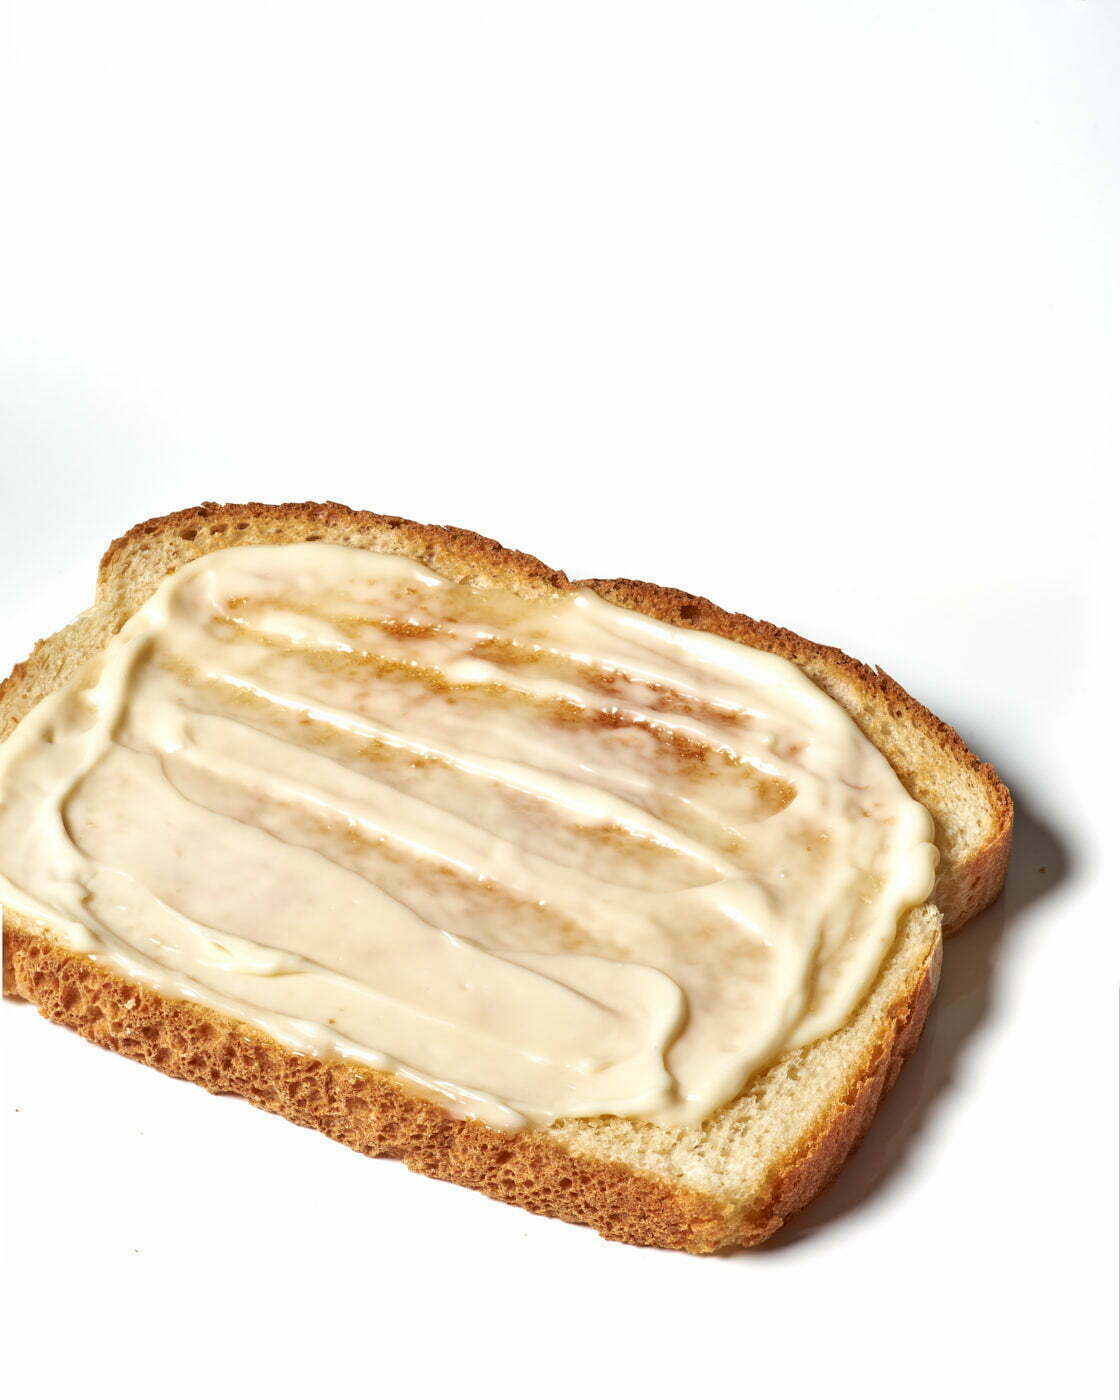 A single piece of white bread smeared with mayo on a white background